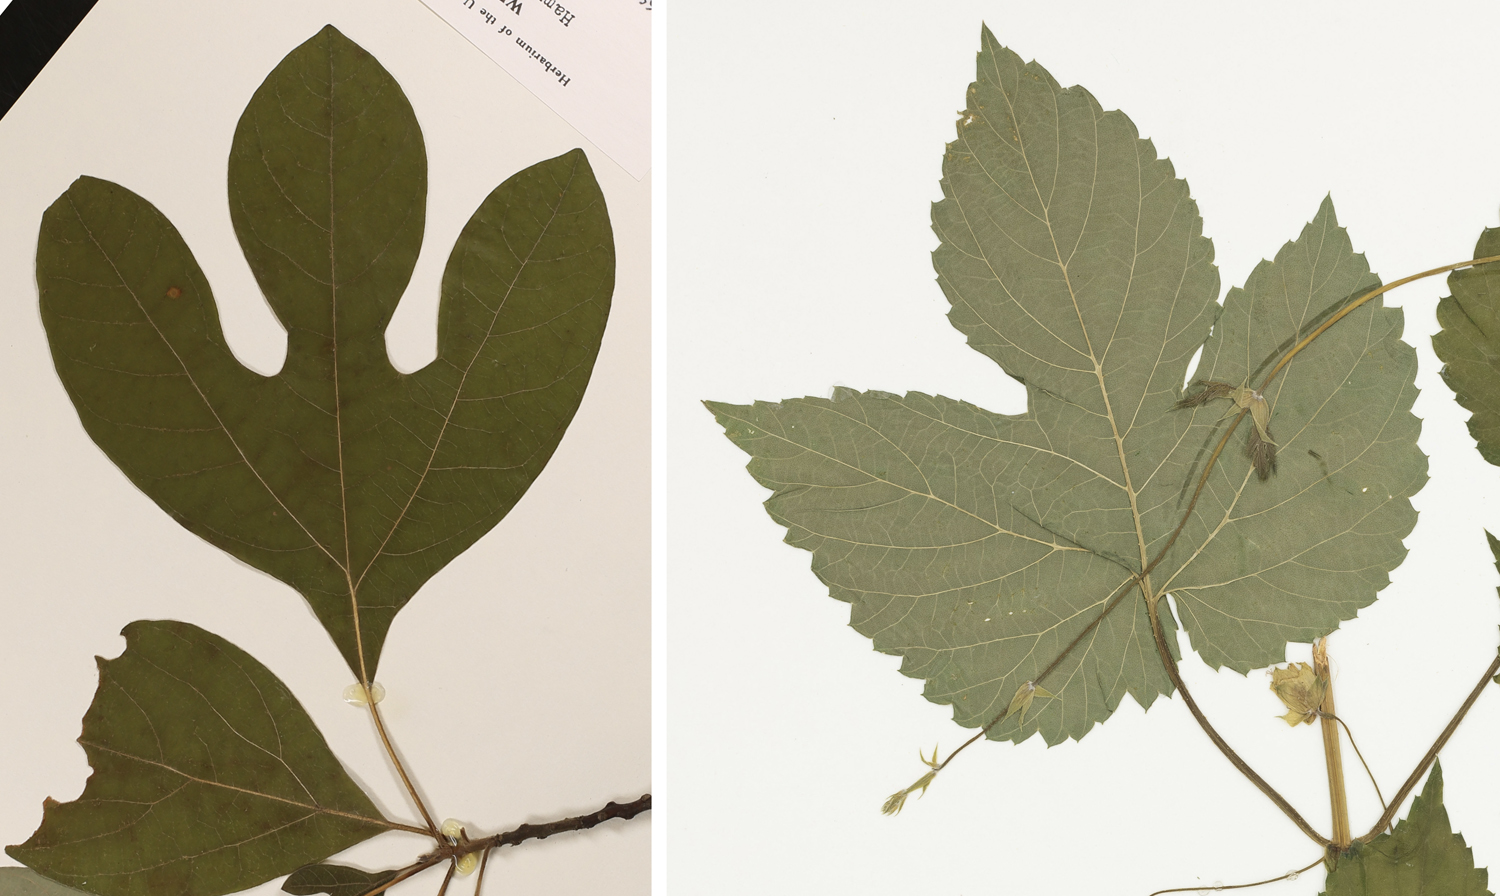 2-Panel figure with photgraphs of sassafras leaves. Panel 1. Three-lobed leaf of sassafras without teeth on the margin. Panel 2. Three-lobed leaf of hops that has a margin with teeth.